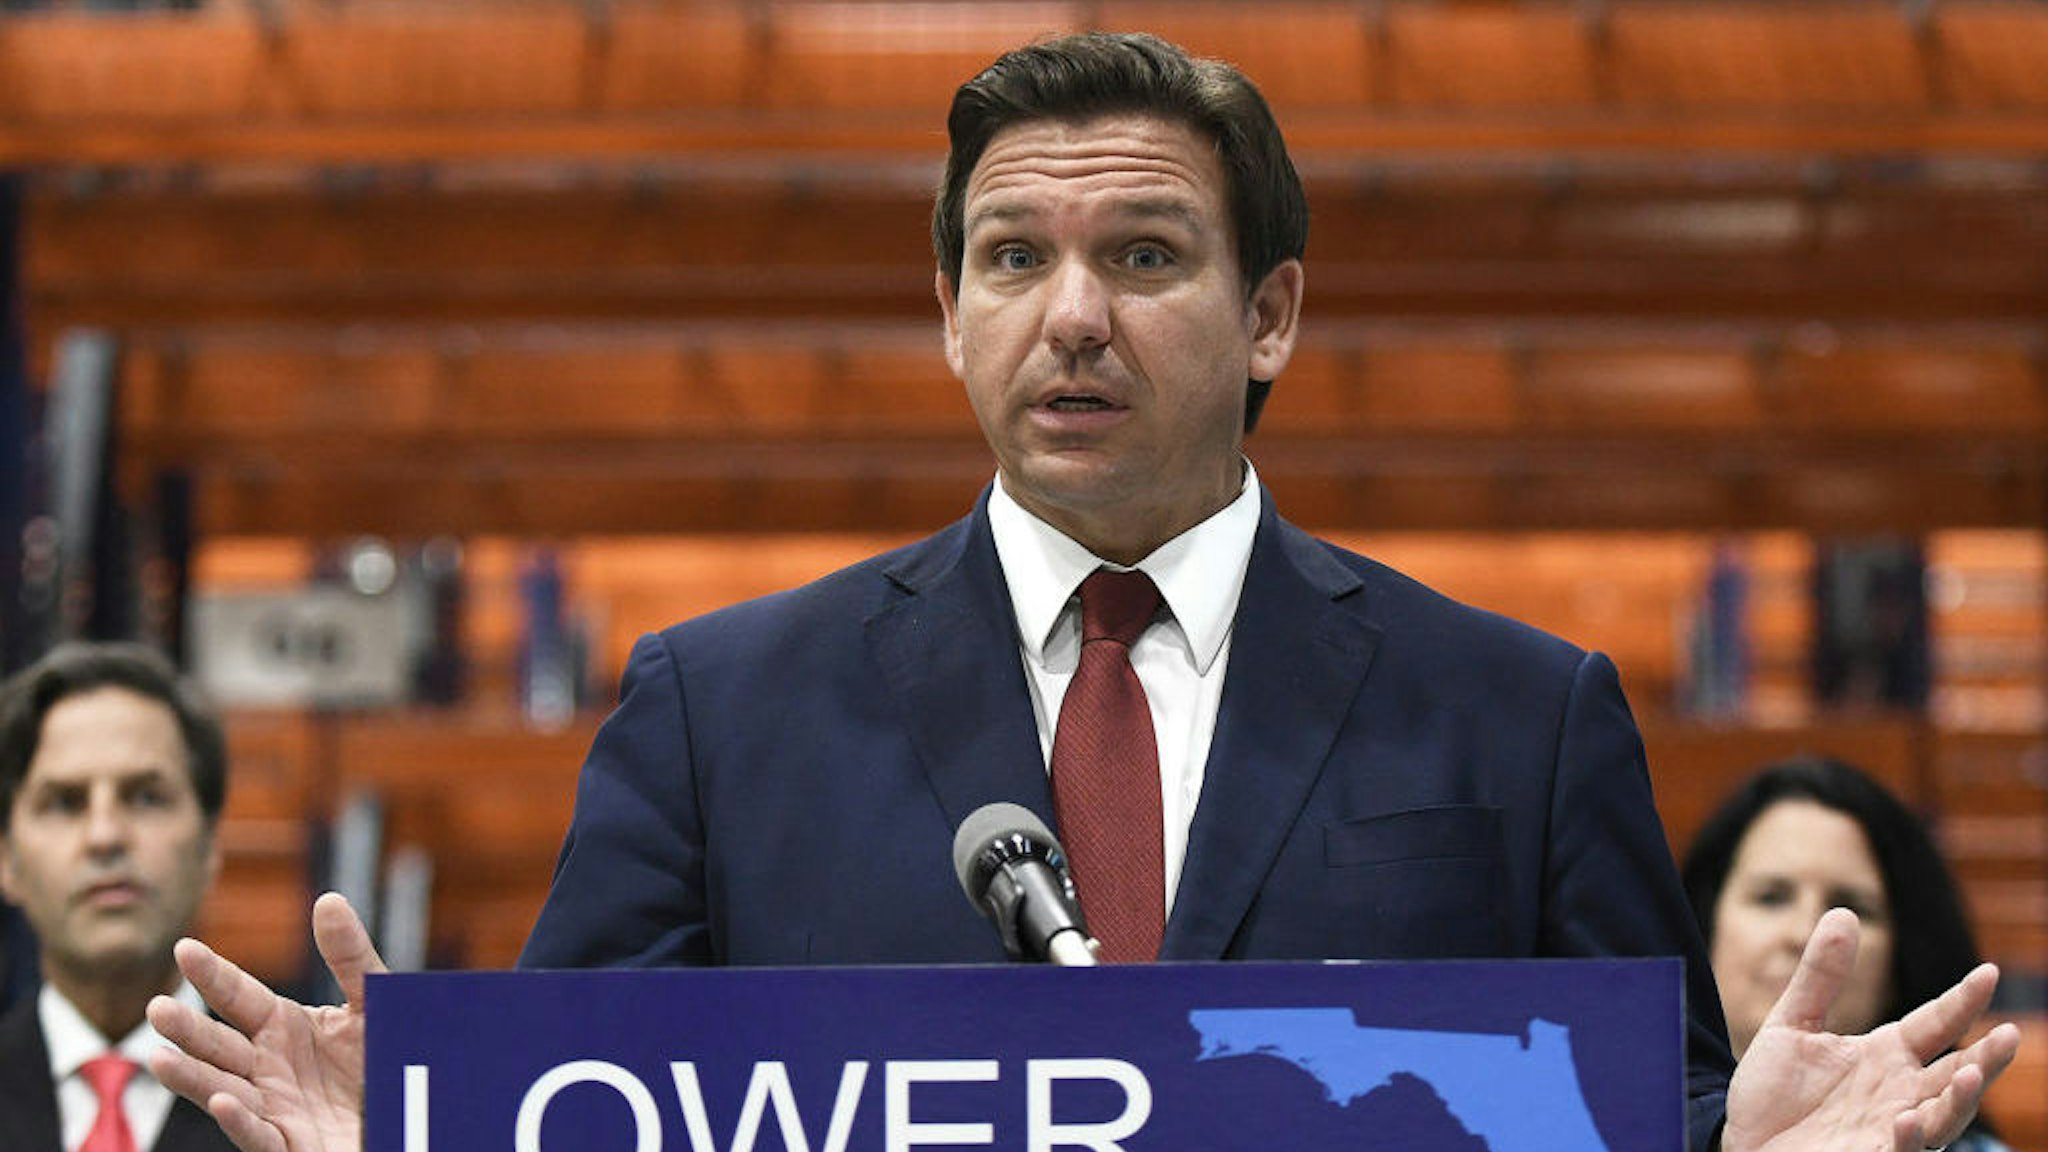 LAKELAND, FLORIDA, UNITED STATES - 2021/05/28: Florida Gov. Ron DeSantis speaks at a press conference at LifeScience Logistics to urge the Biden administration to approve Florida's plan to import prescription drugs from Canada, thereby saving Floridians an estimated $100 million annually on drug costs. (Photo by Paul Hennessy/SOPA Images/LightRocket via Getty Images)